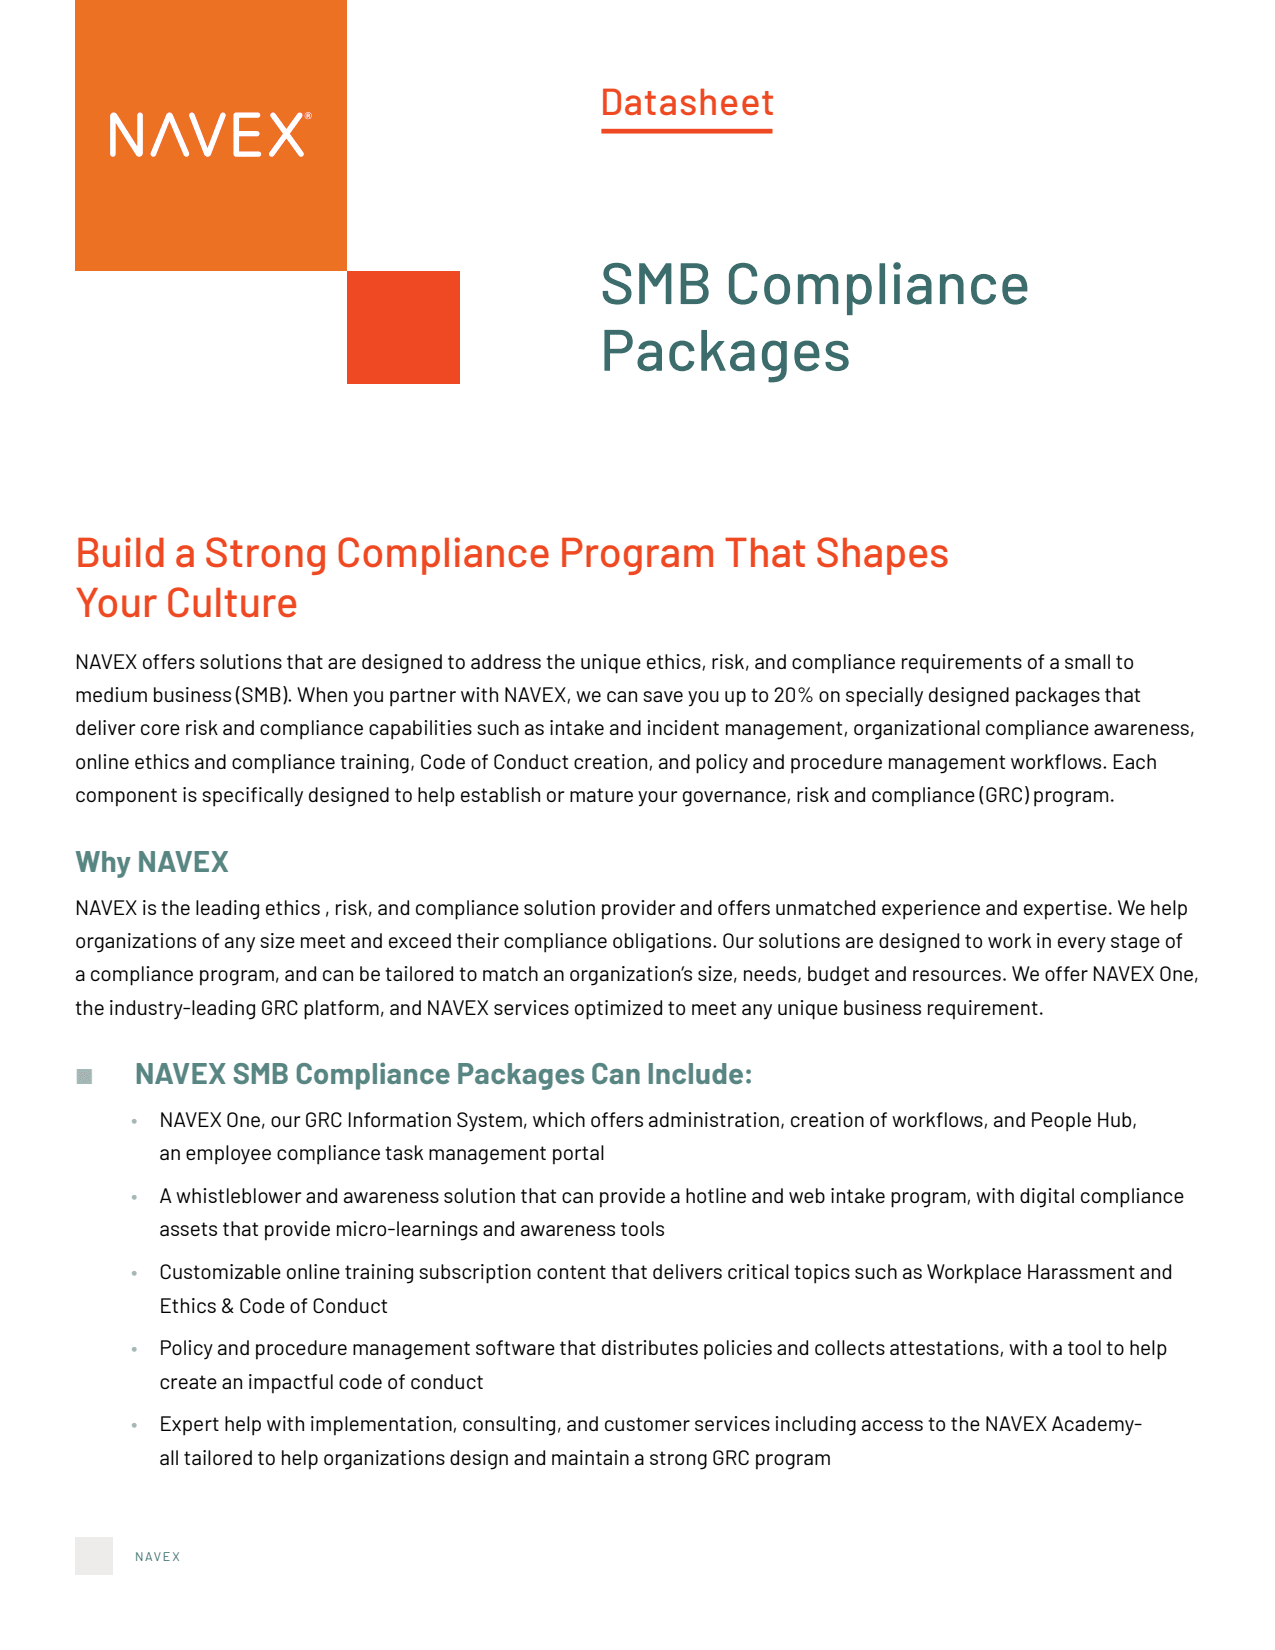 Uncover all your SMB compliance needs in one bundle